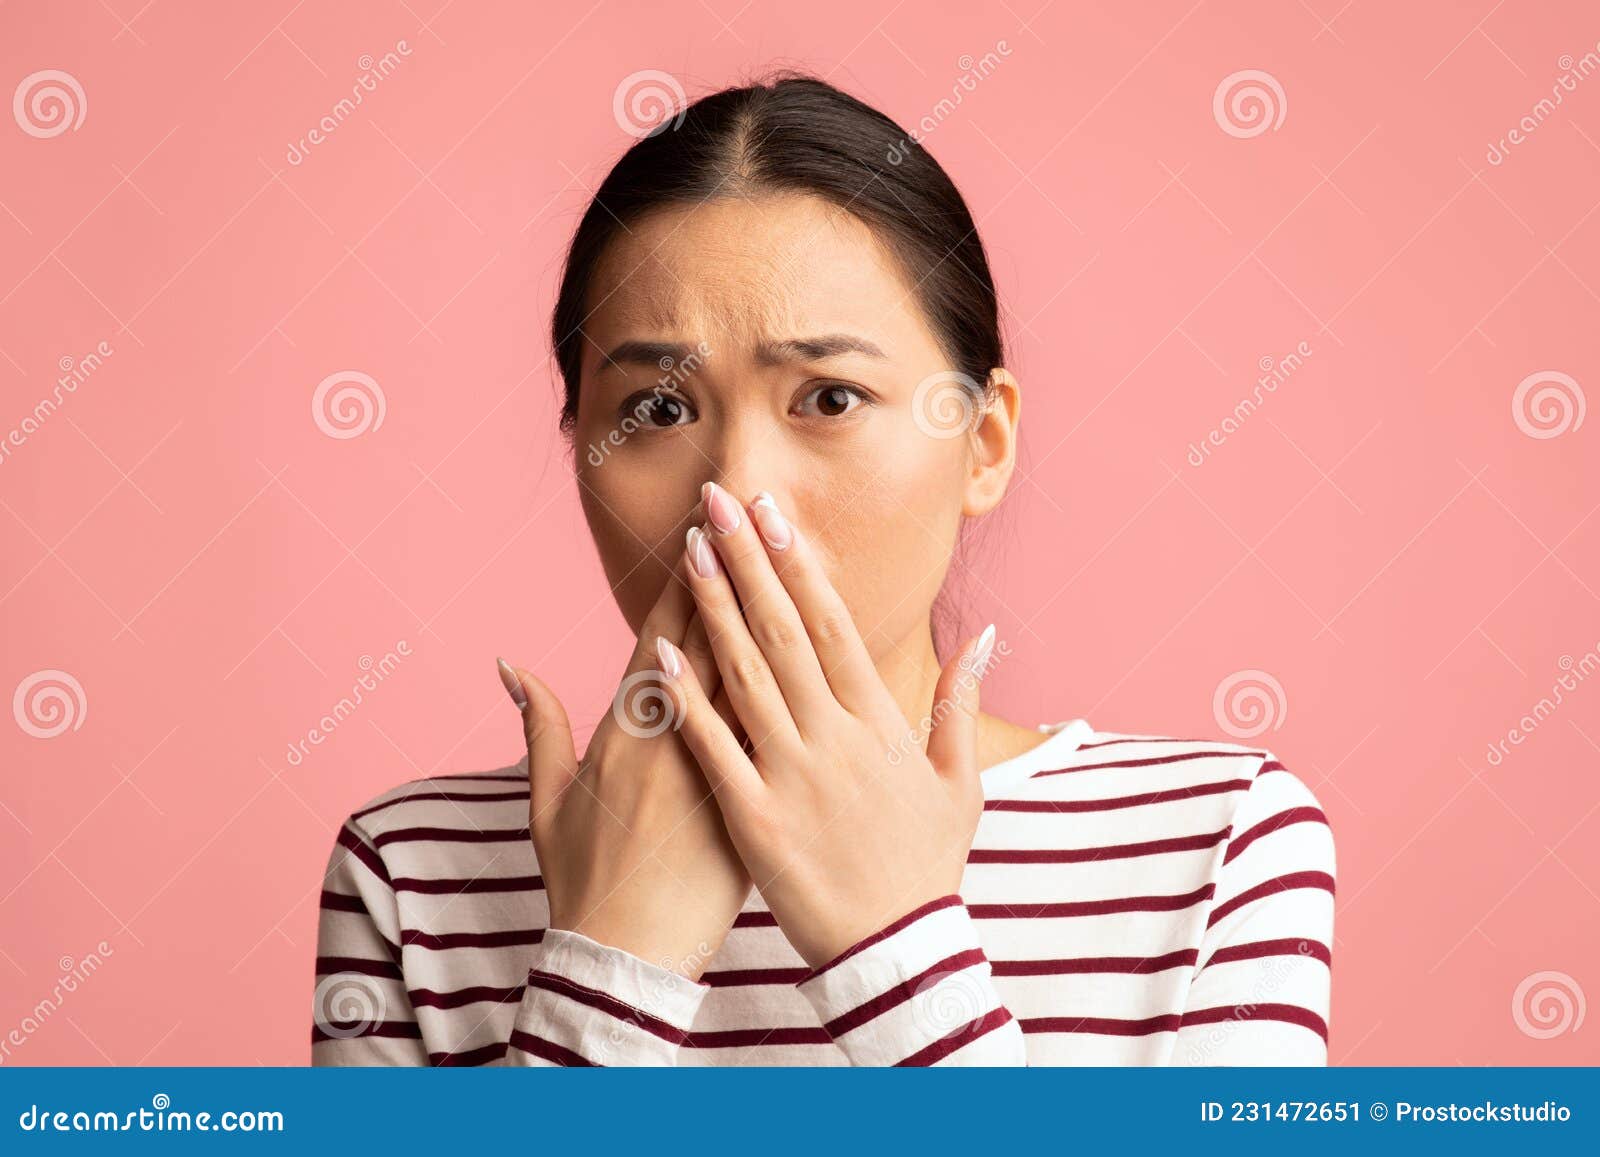 Oh No Portrait Of Shocked Asian Woman Covering Mouth With Hands Stock Image Image Of Secrecy